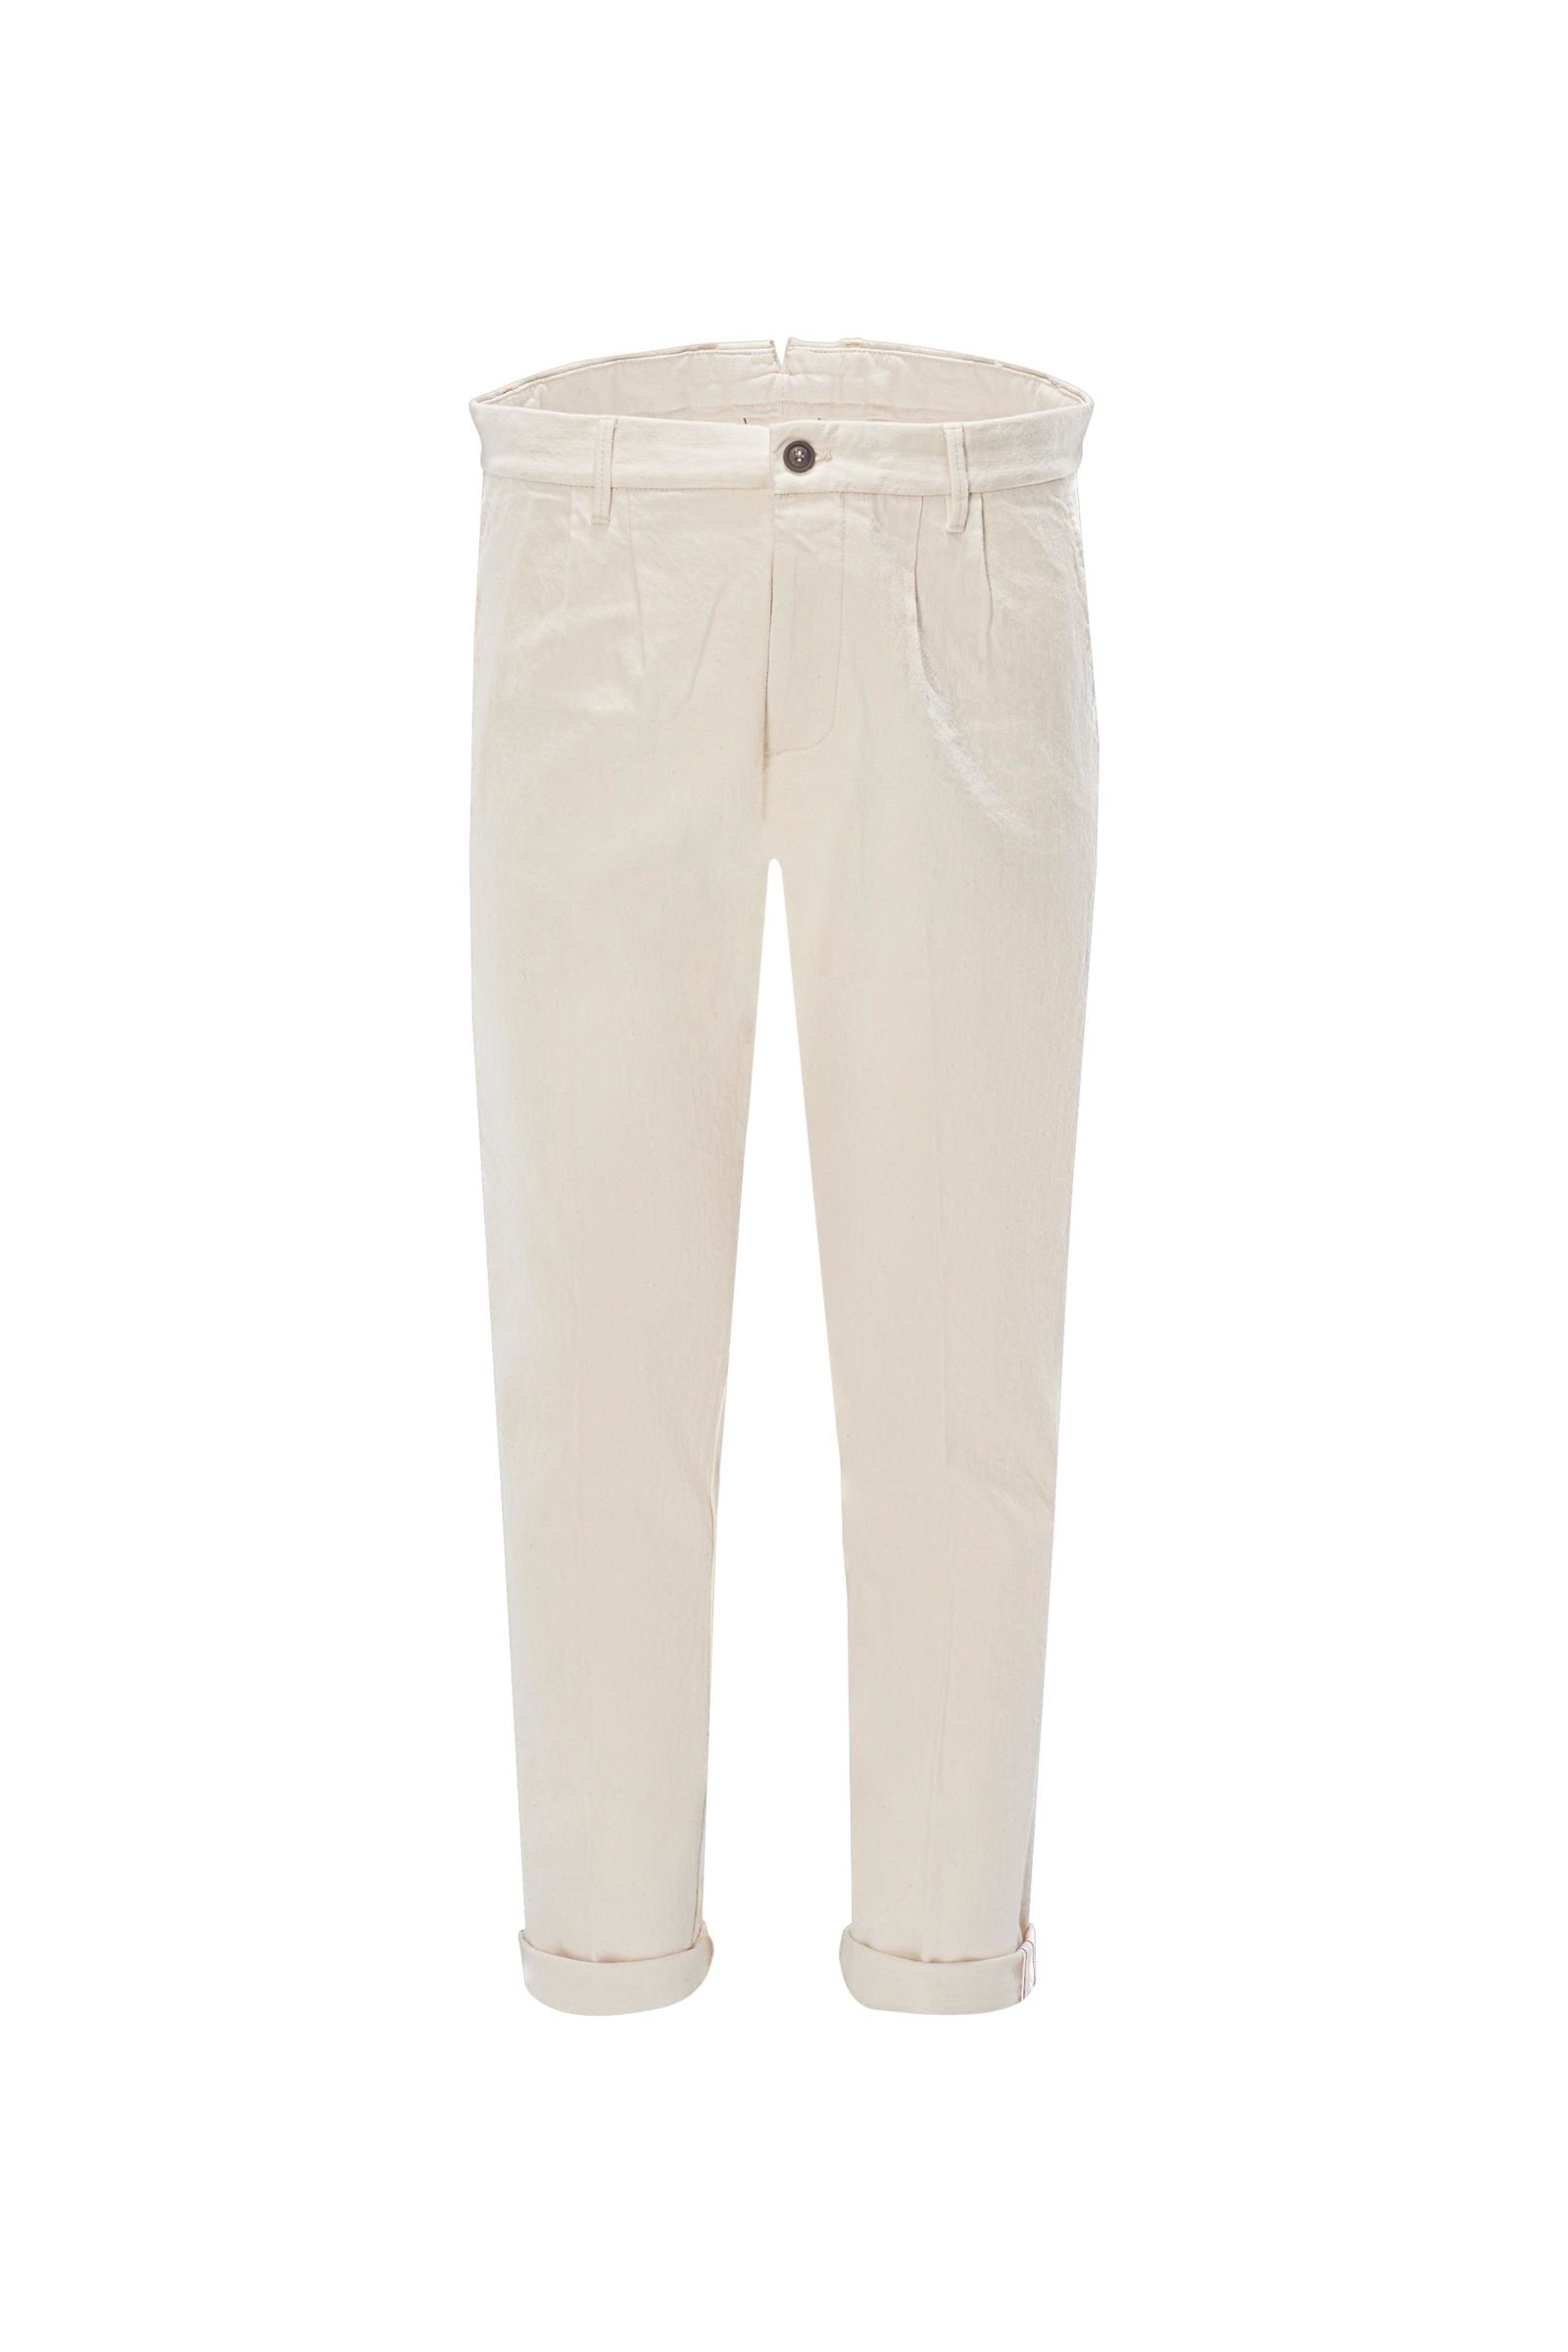 Chino 'Pences AMF 17/32-45' beige